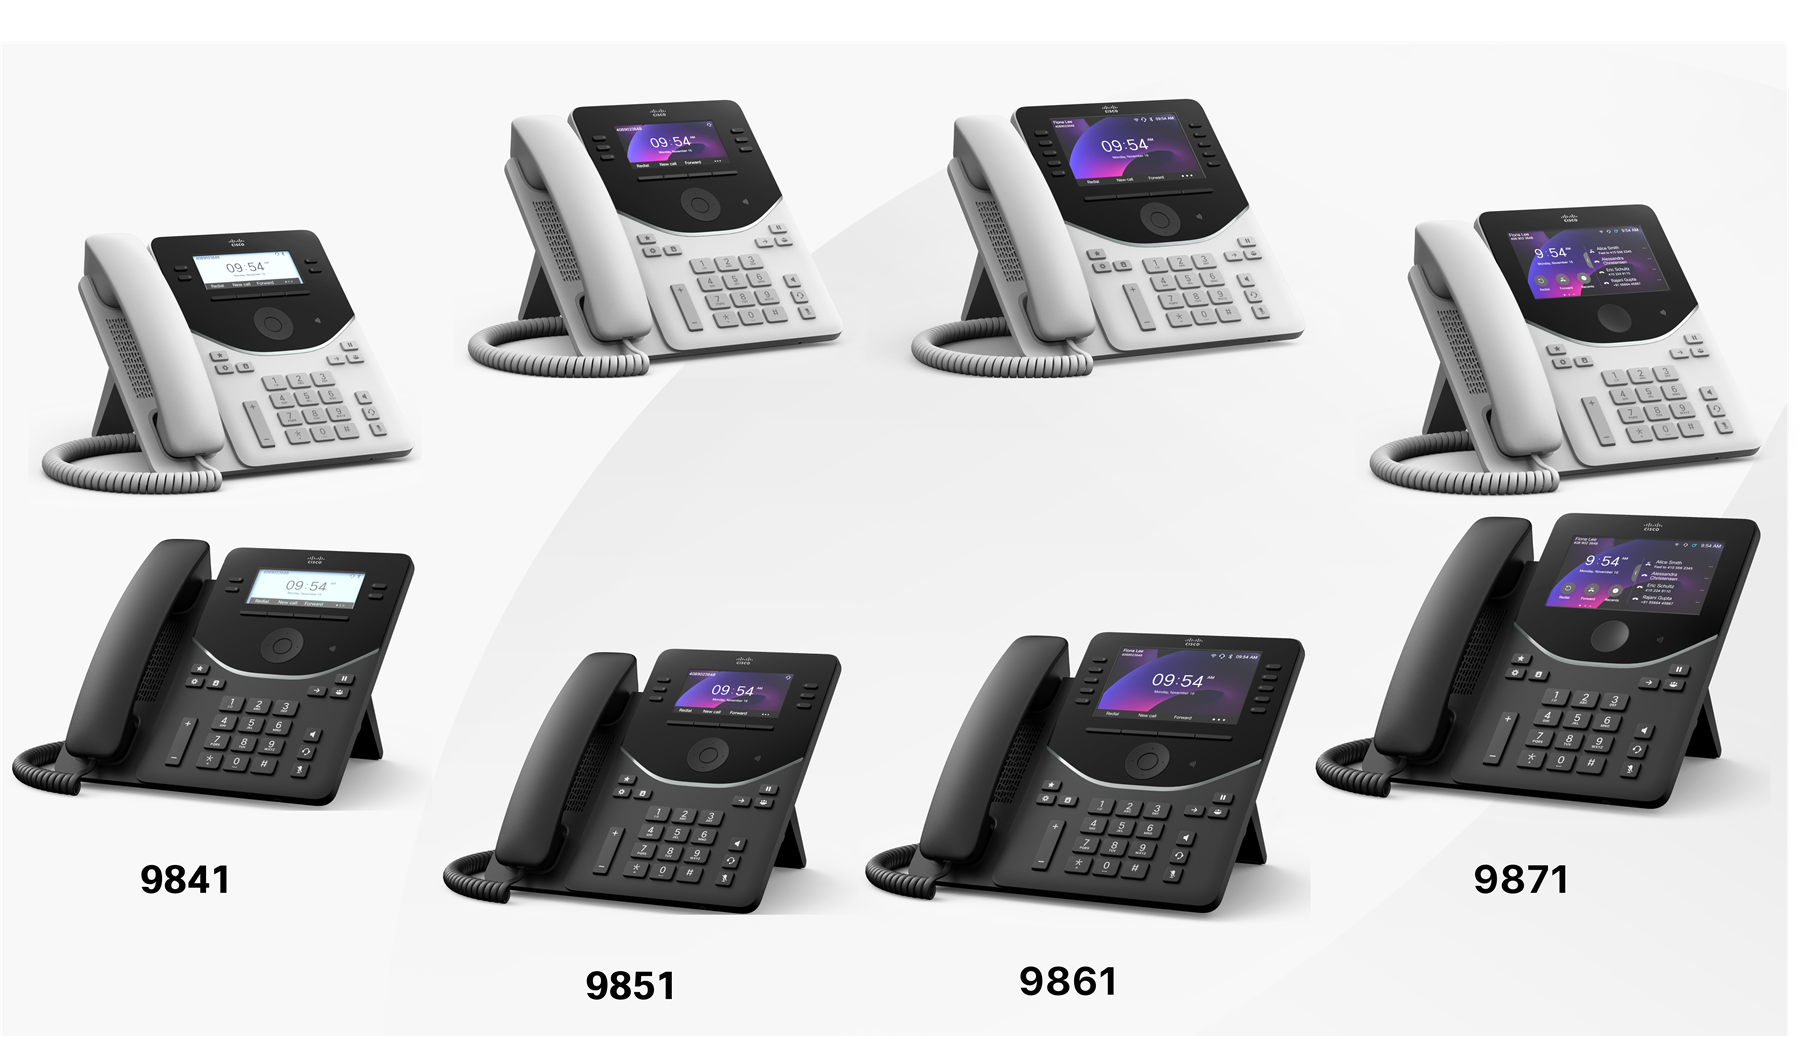 The collection of Desk Phone 9800 Series